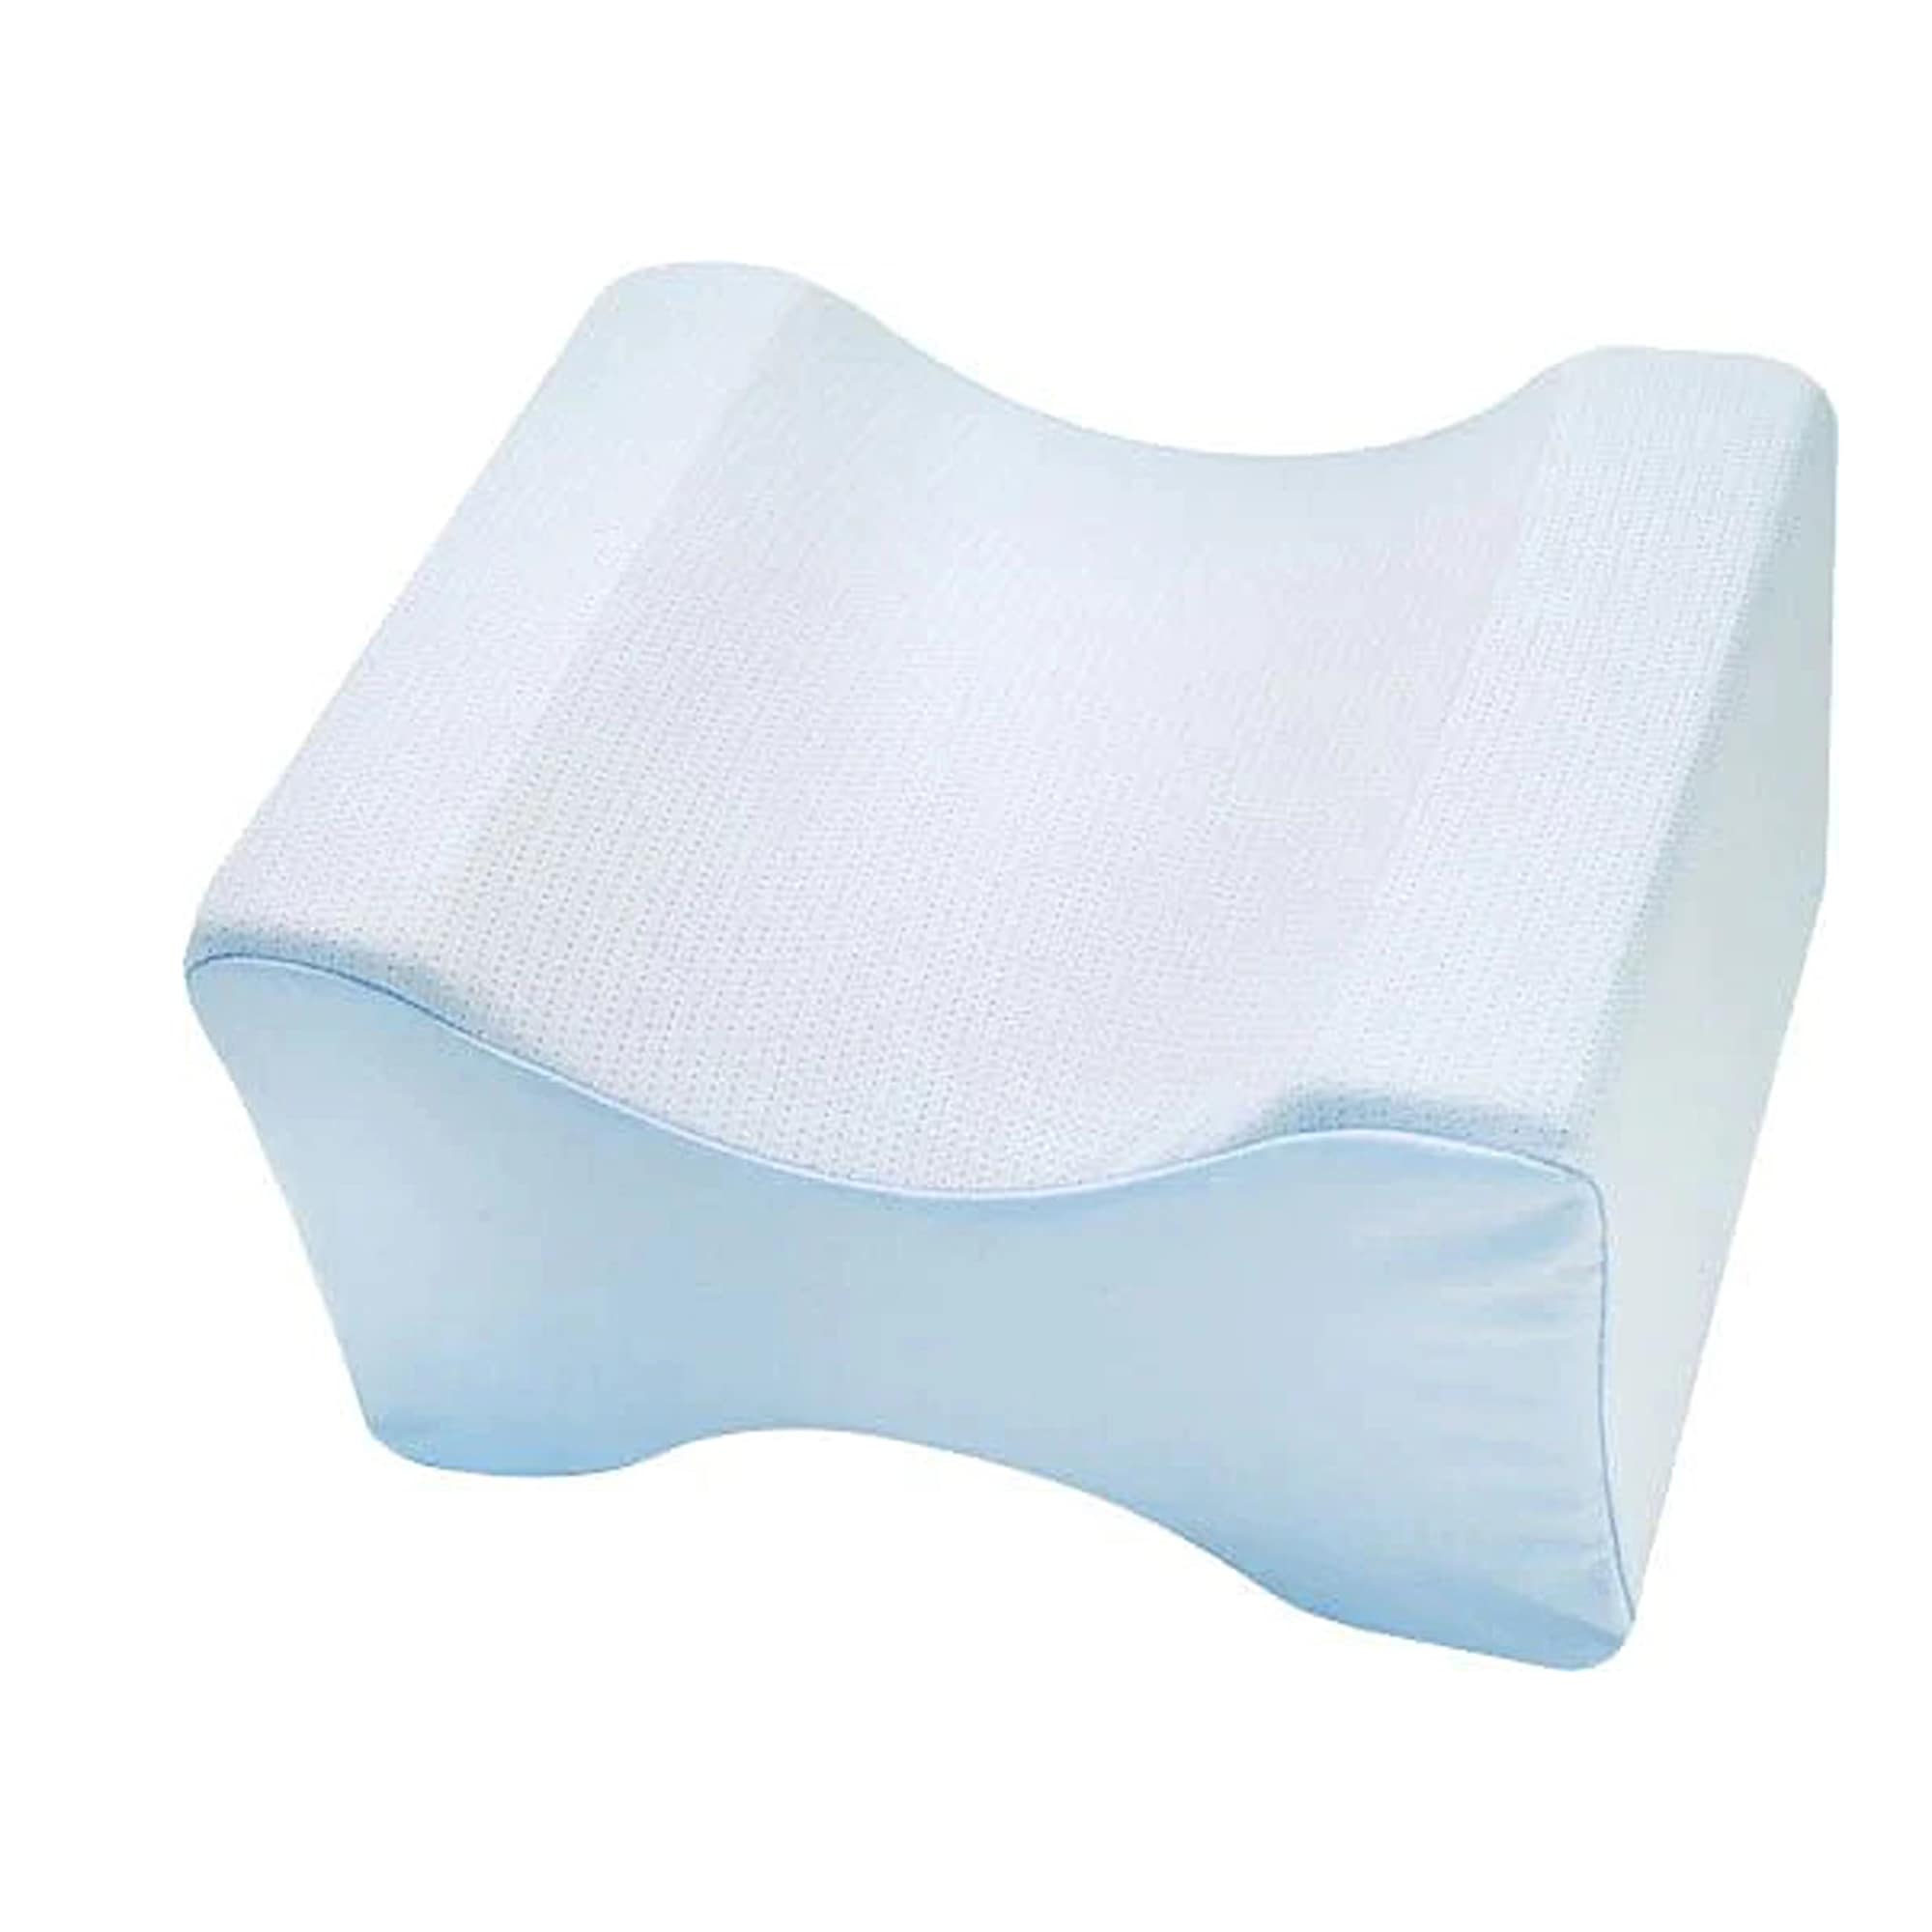 https://ak1.ostkcdn.com/images/products/is/images/direct/8d68bd3a351280d9c6de01ed26859d94e0db4b6b/Leg-Pillow---Adjusts-Your-Hips%2C-Legs-And-Spine-For-A-Comfortable-Sleep.jpg